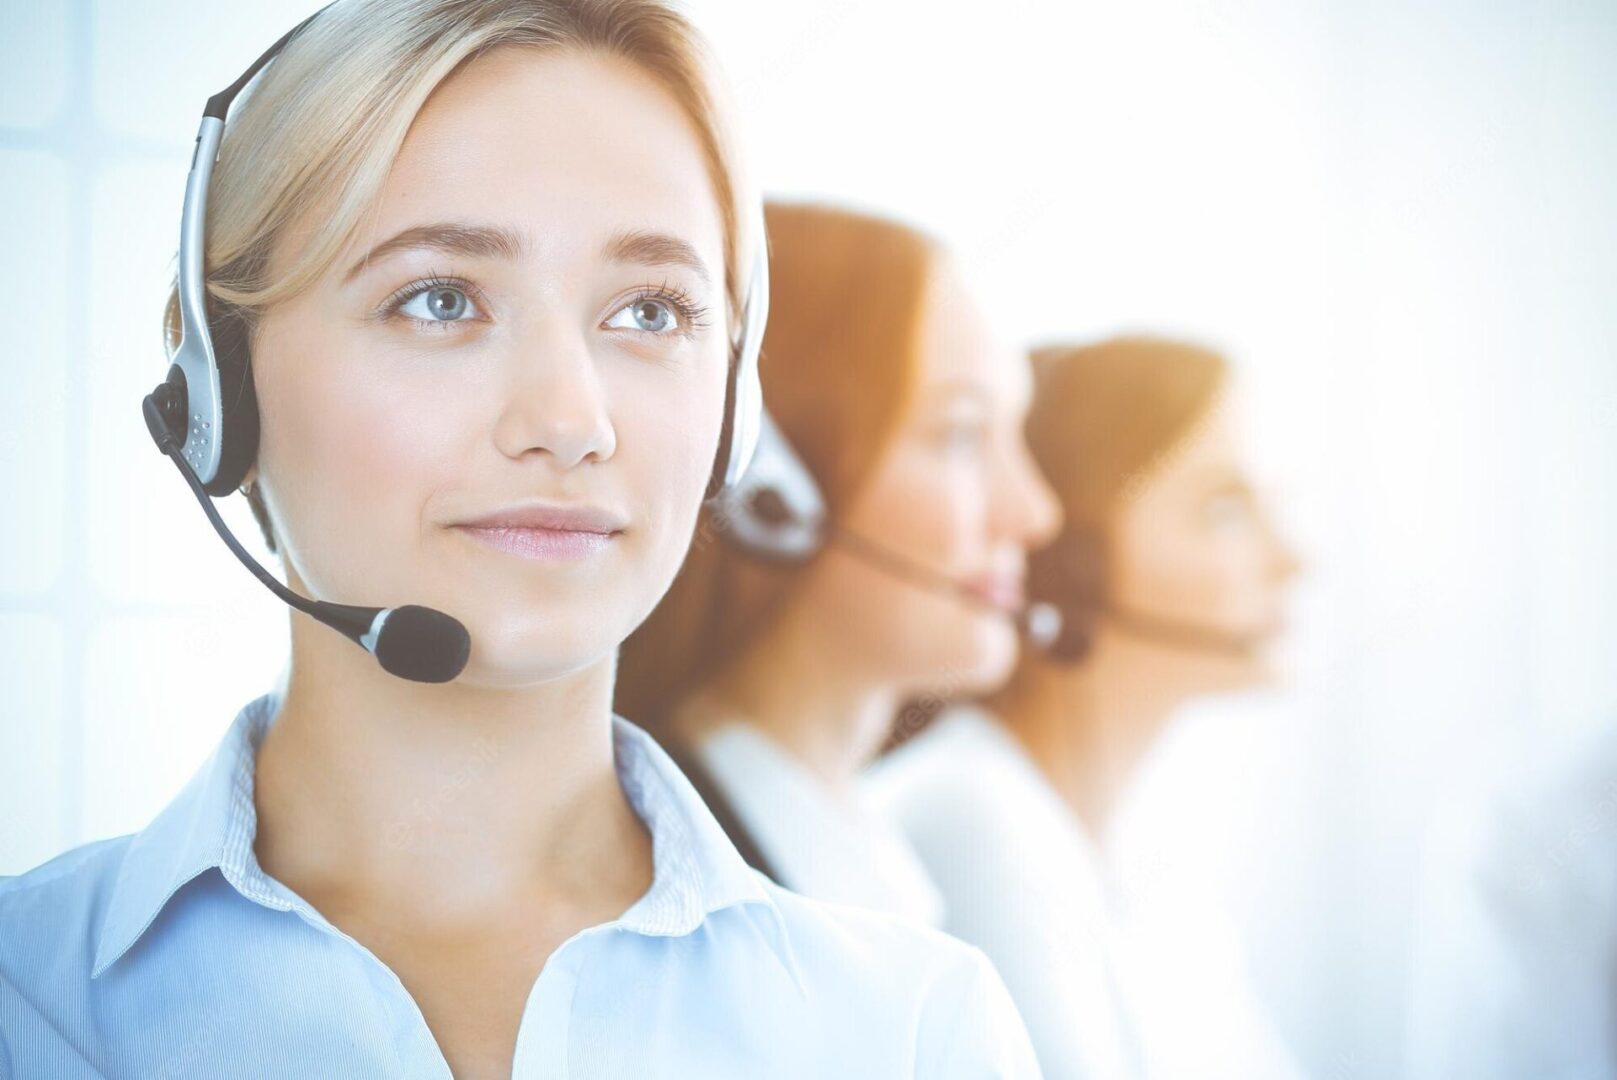 cheerful-smiling-business-woman-with-headphones-consulting-clients-group-diverse-phone-operators-work-sunny-office-call-center-business-people-concept_665183-6358